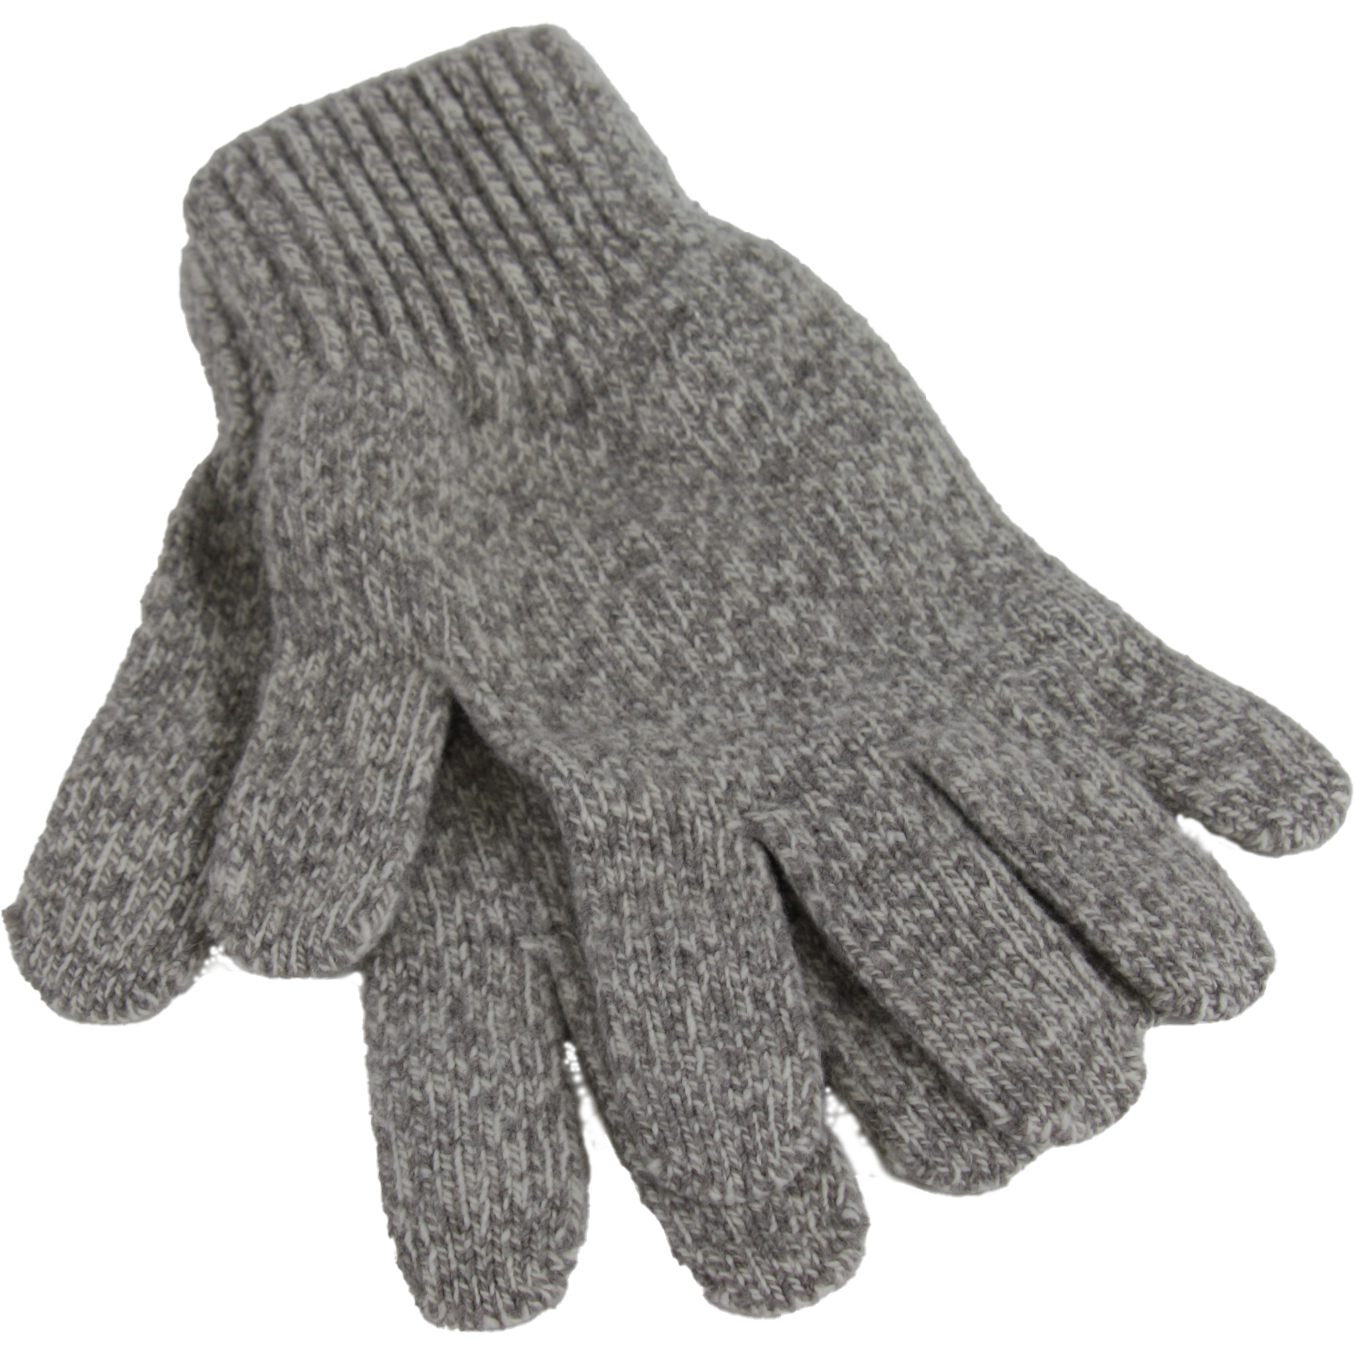 Knitty Gritty - Gloves